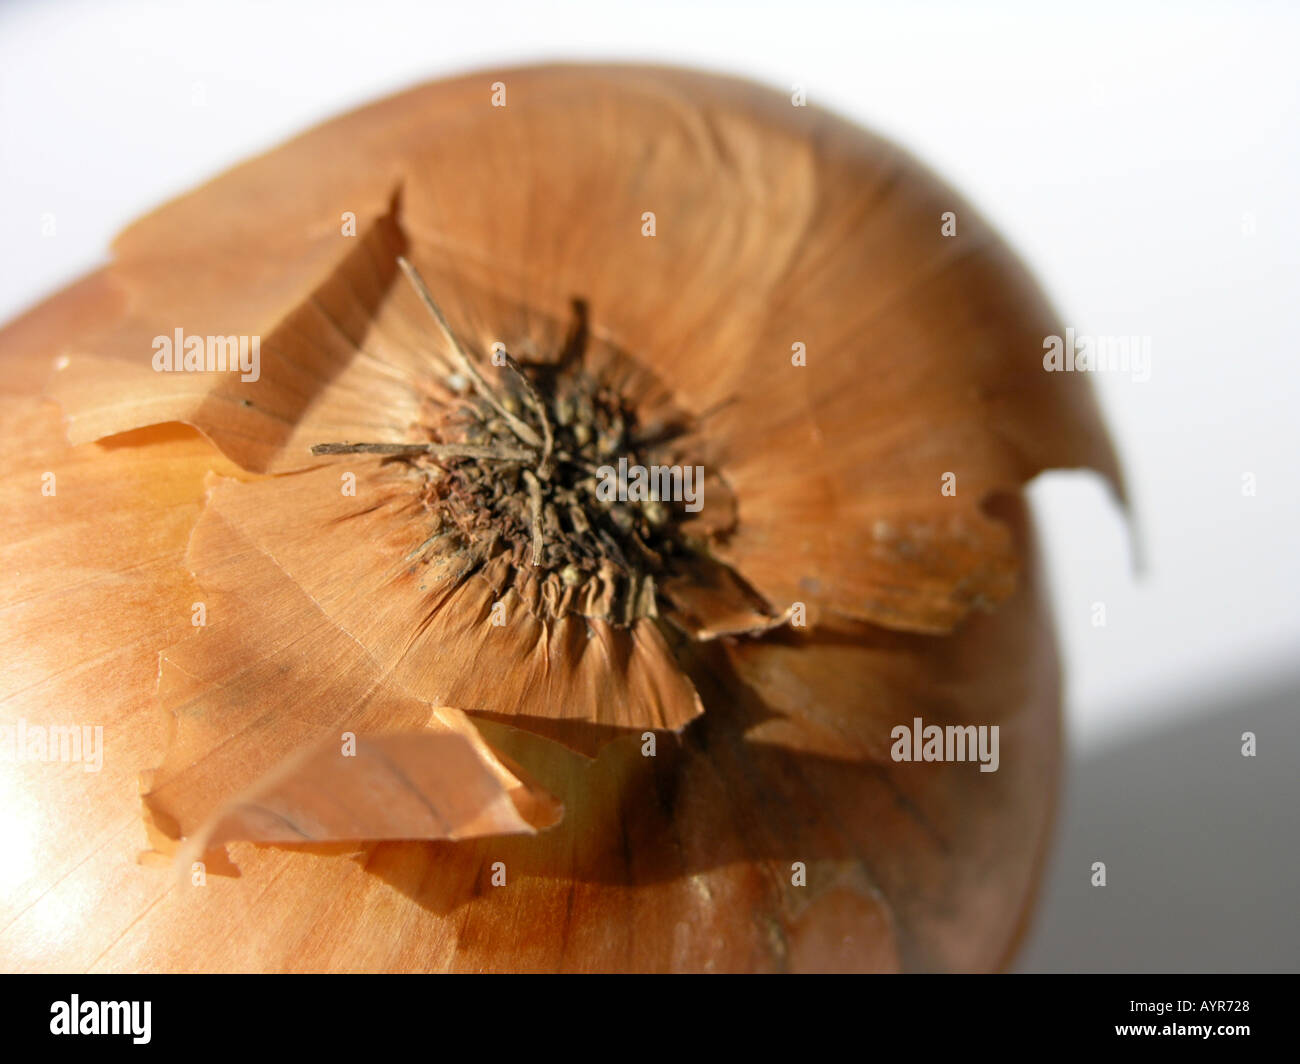 One large whole onion with brown peeling skin Stock Photo